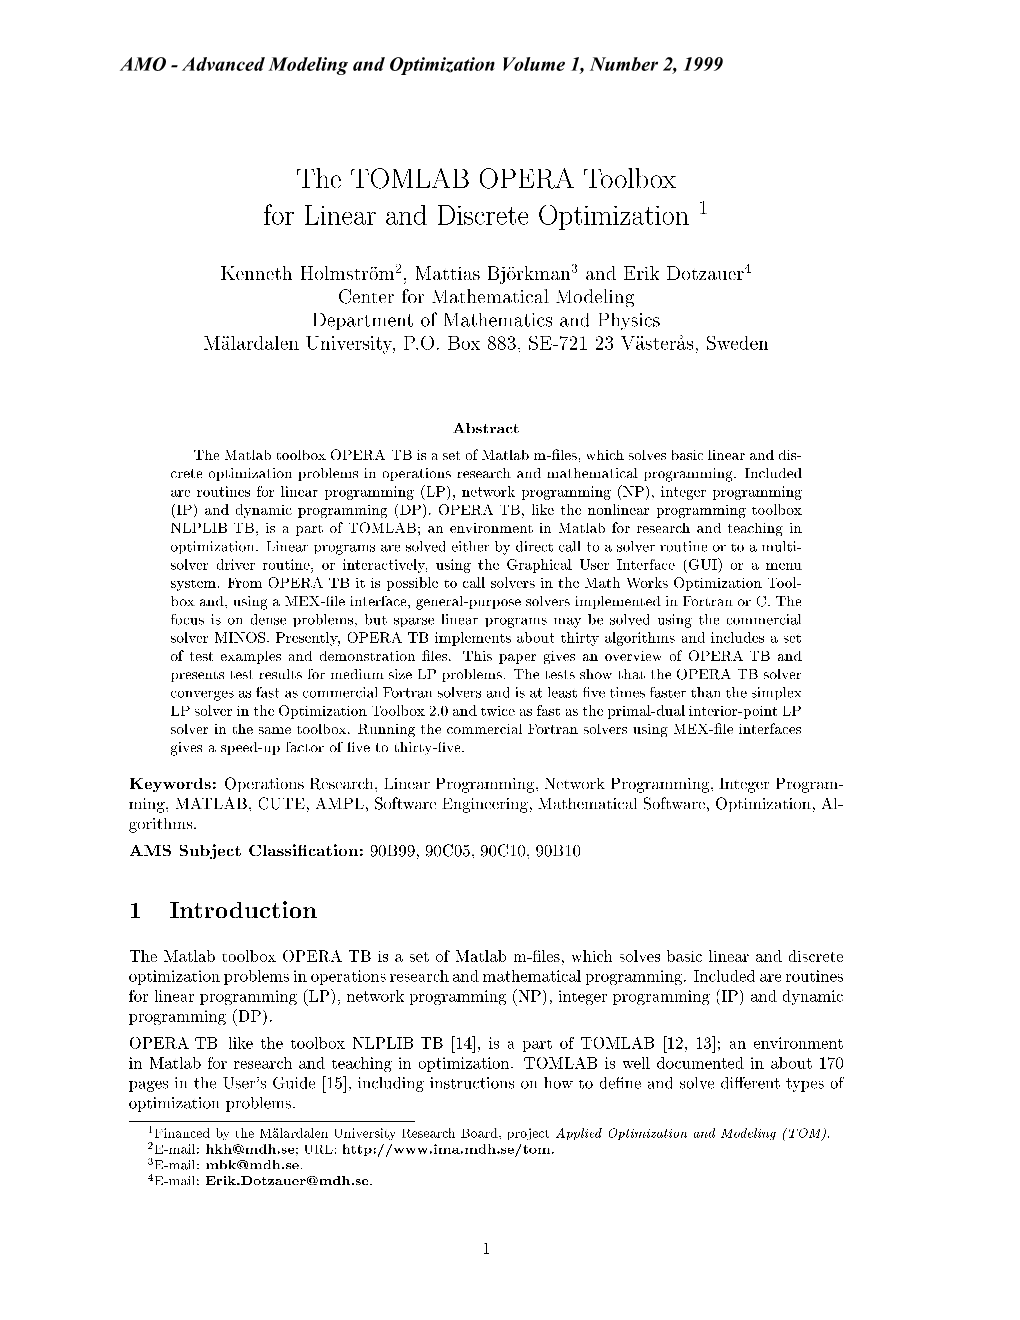 The TOMLAB OPERA Toolbox for Linear and Discrete Optimization 1